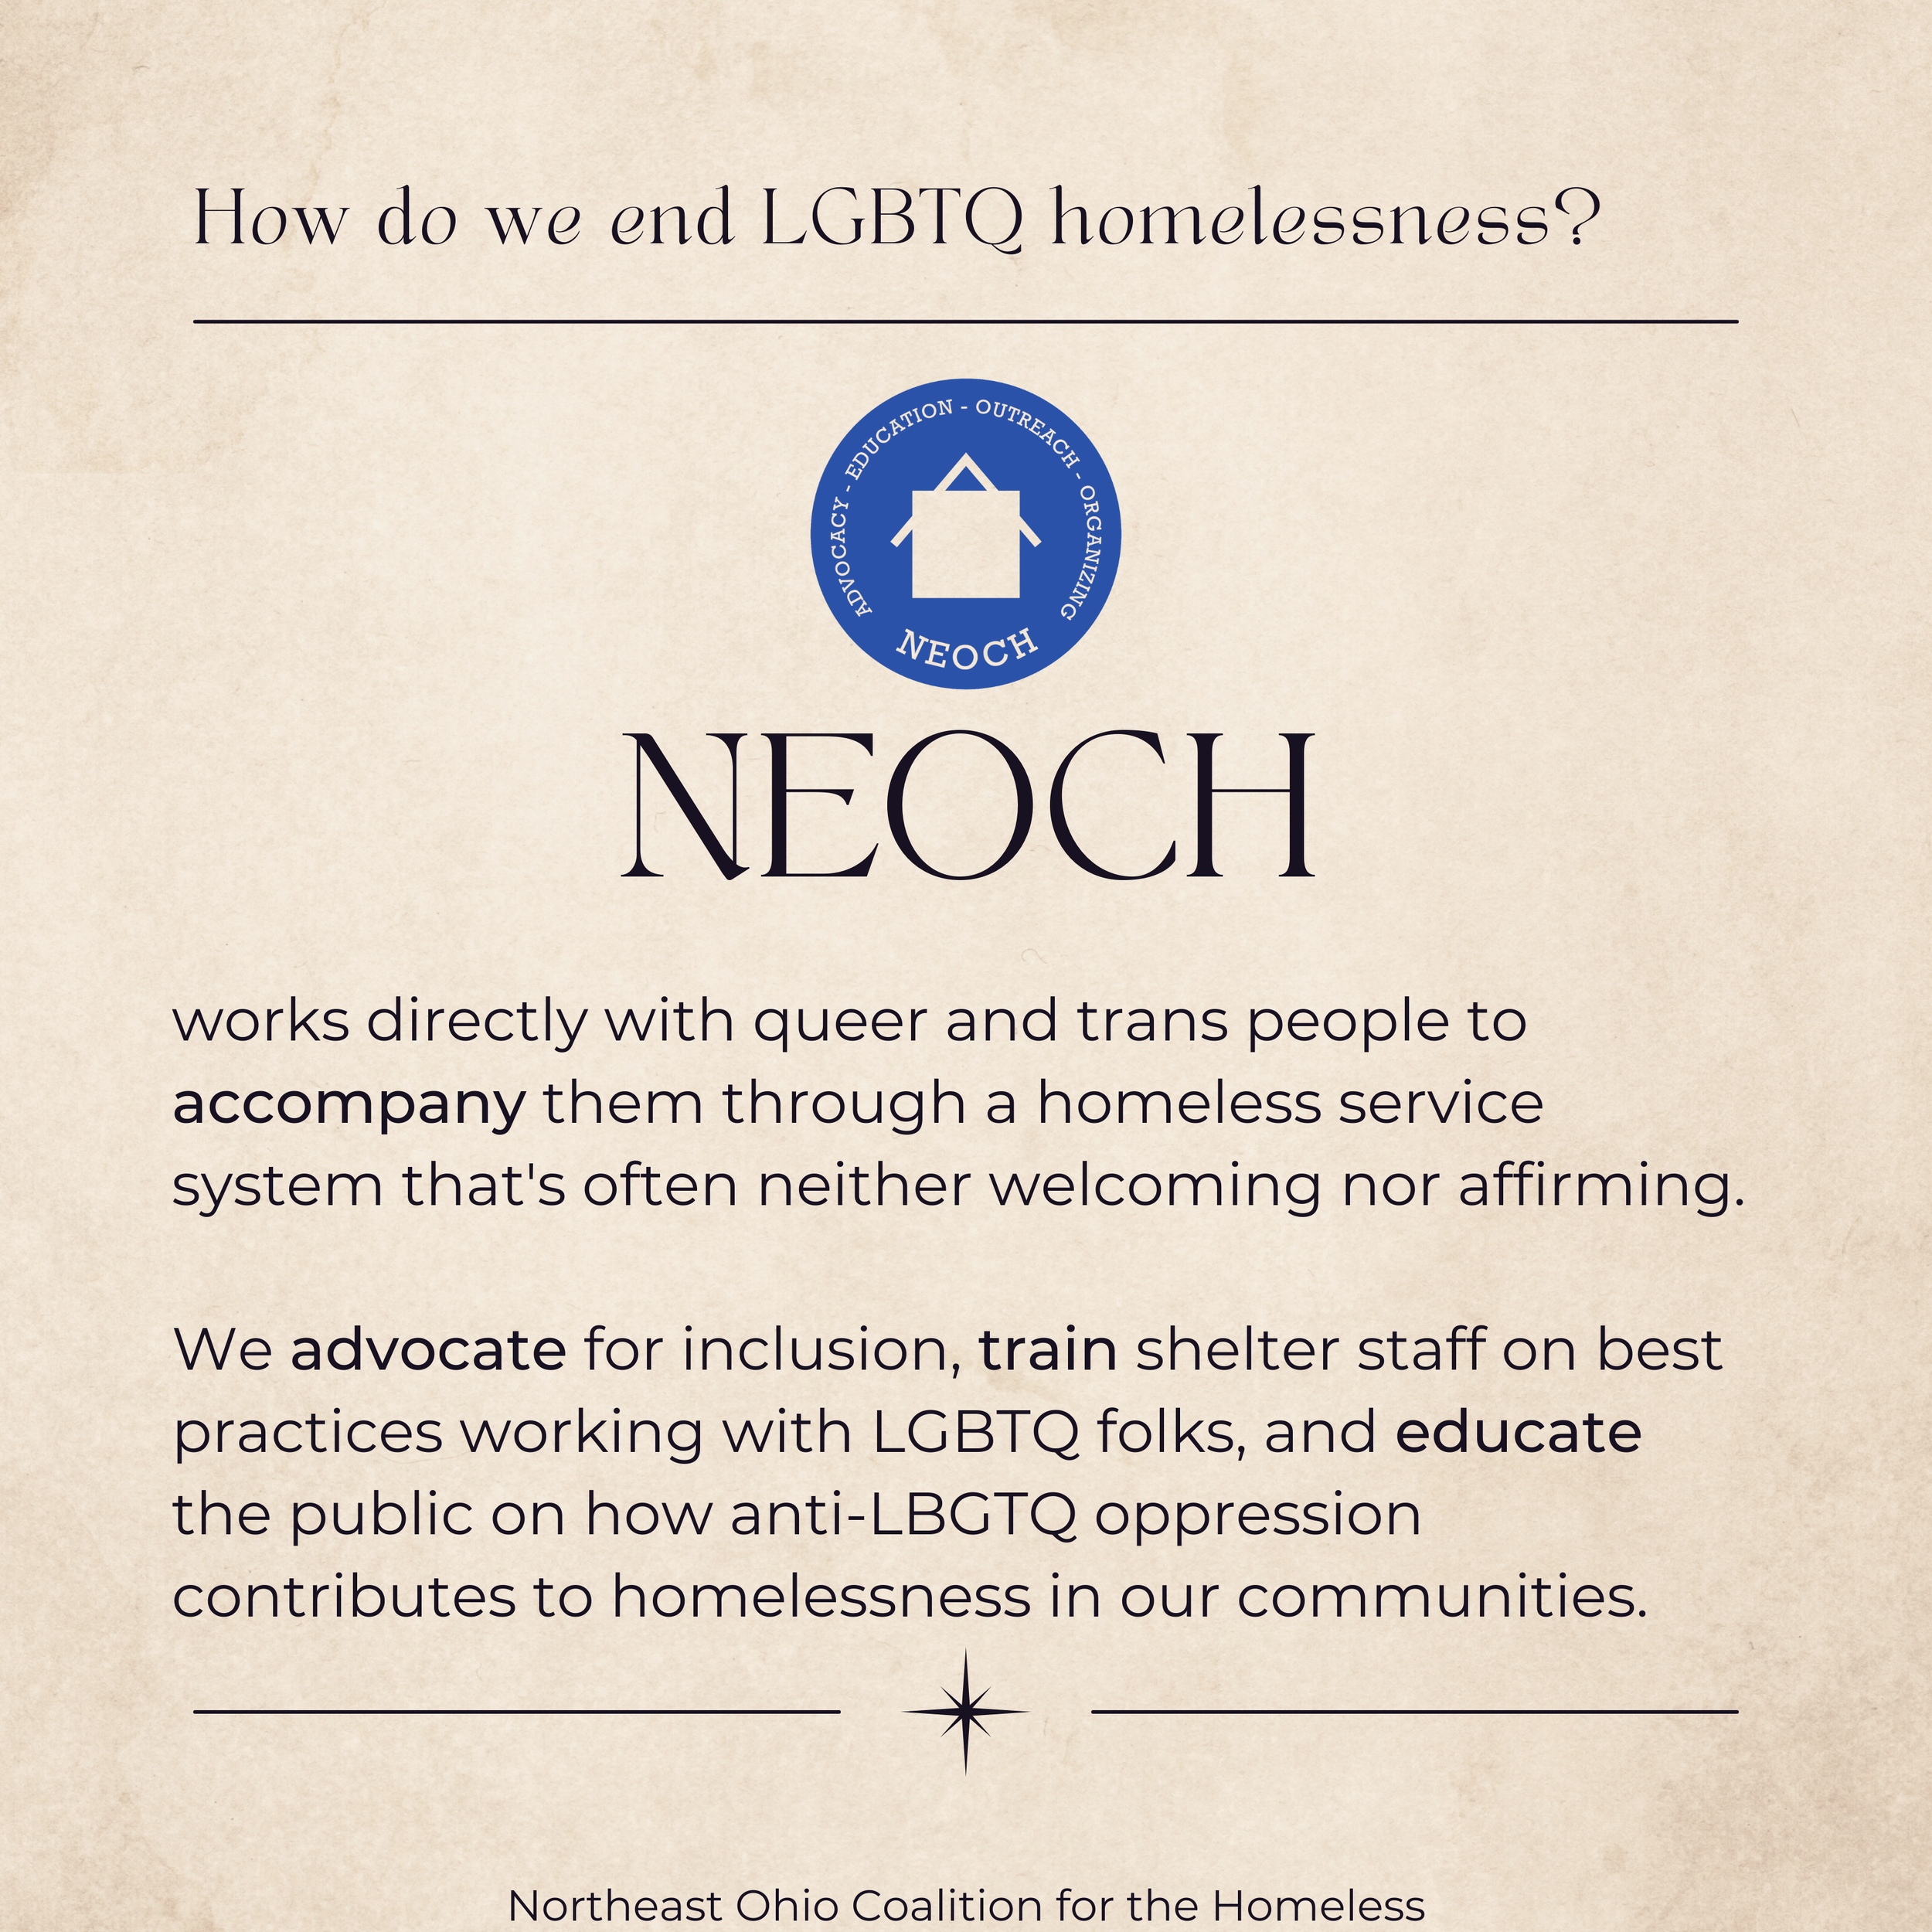 LGBTQ homelessness education campaign (1).png